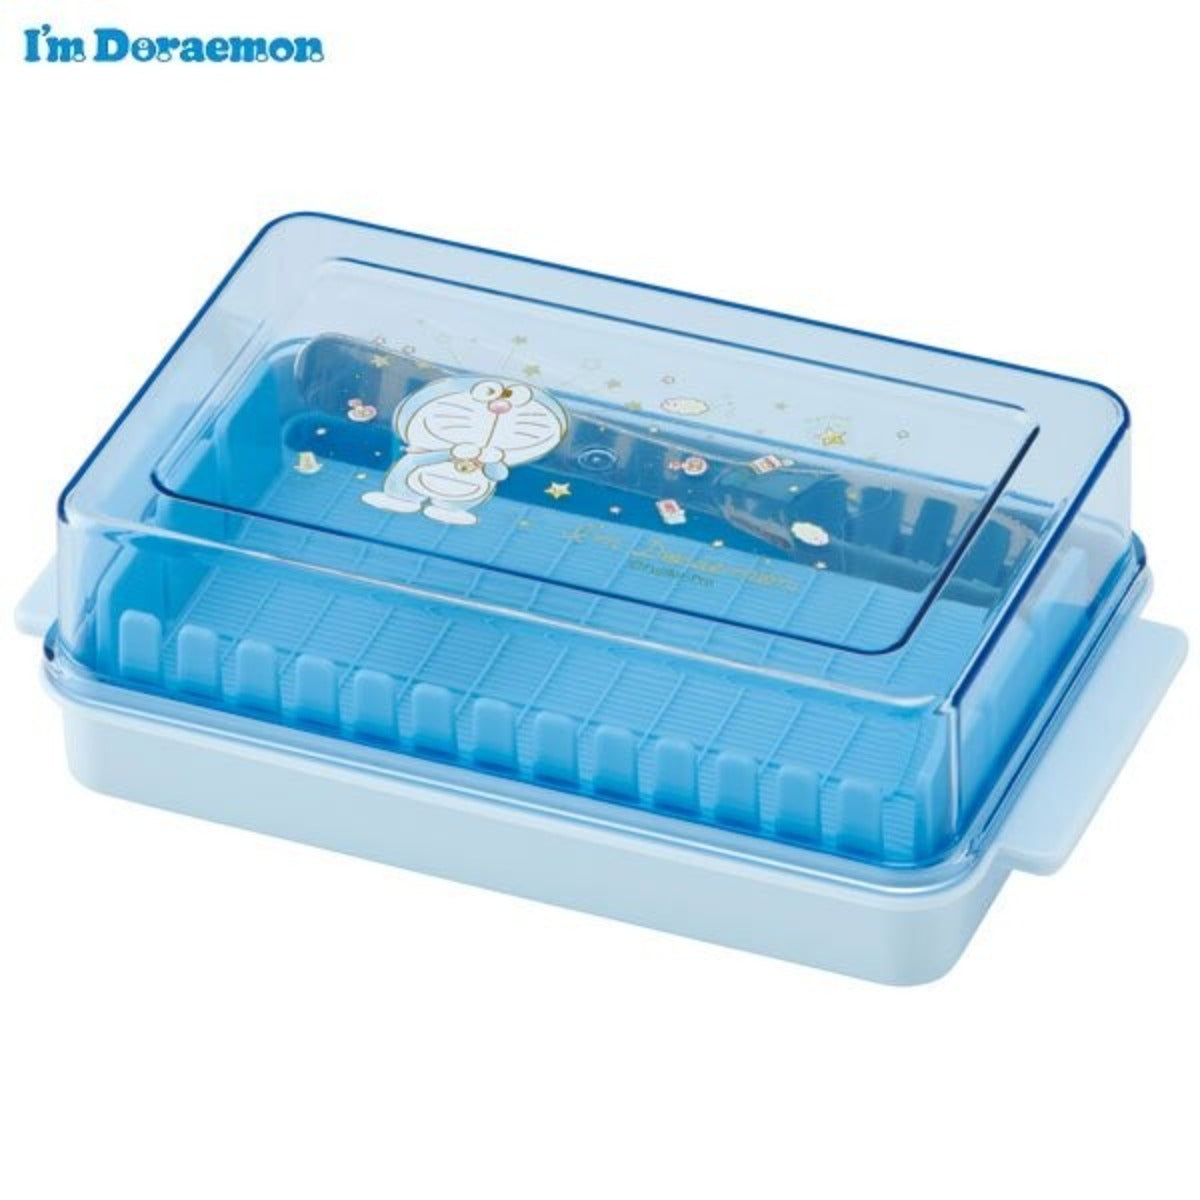 Butter Case - Doraemon Glitter Pastel with Cutting Guide (Japan Edition)